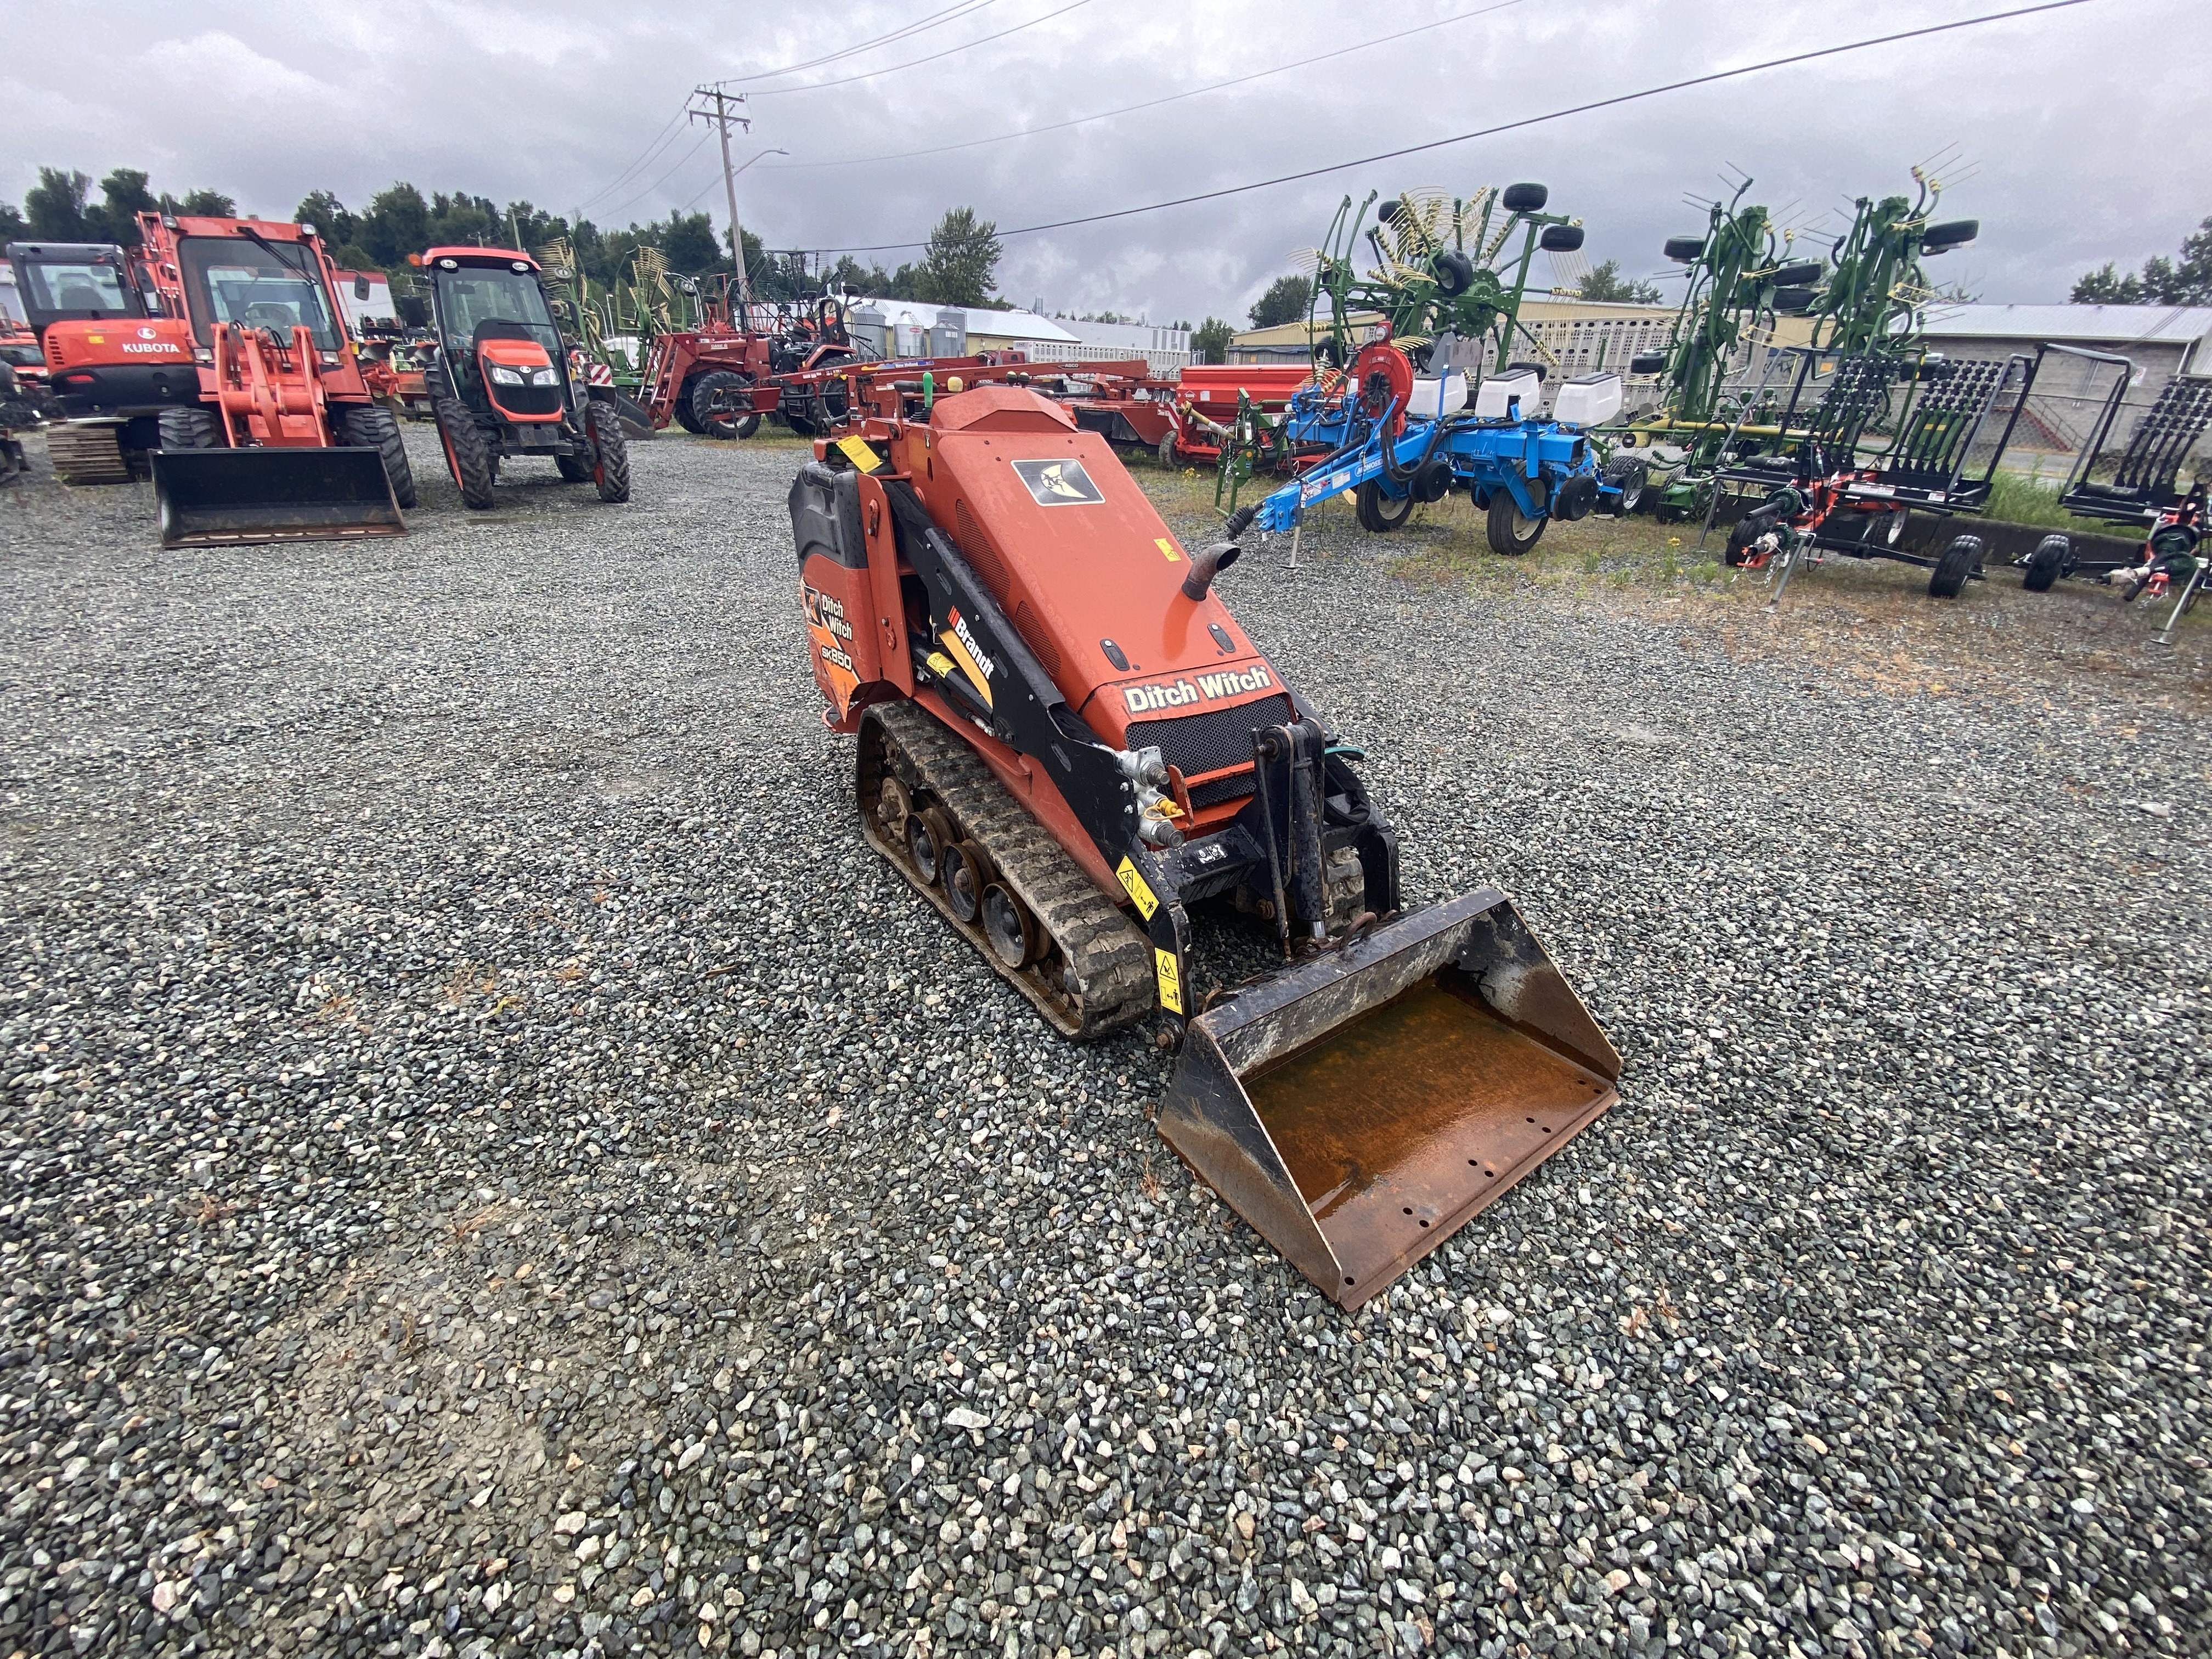 2015 DITCH WITCH SK850 MINI TRACK LOADER 5